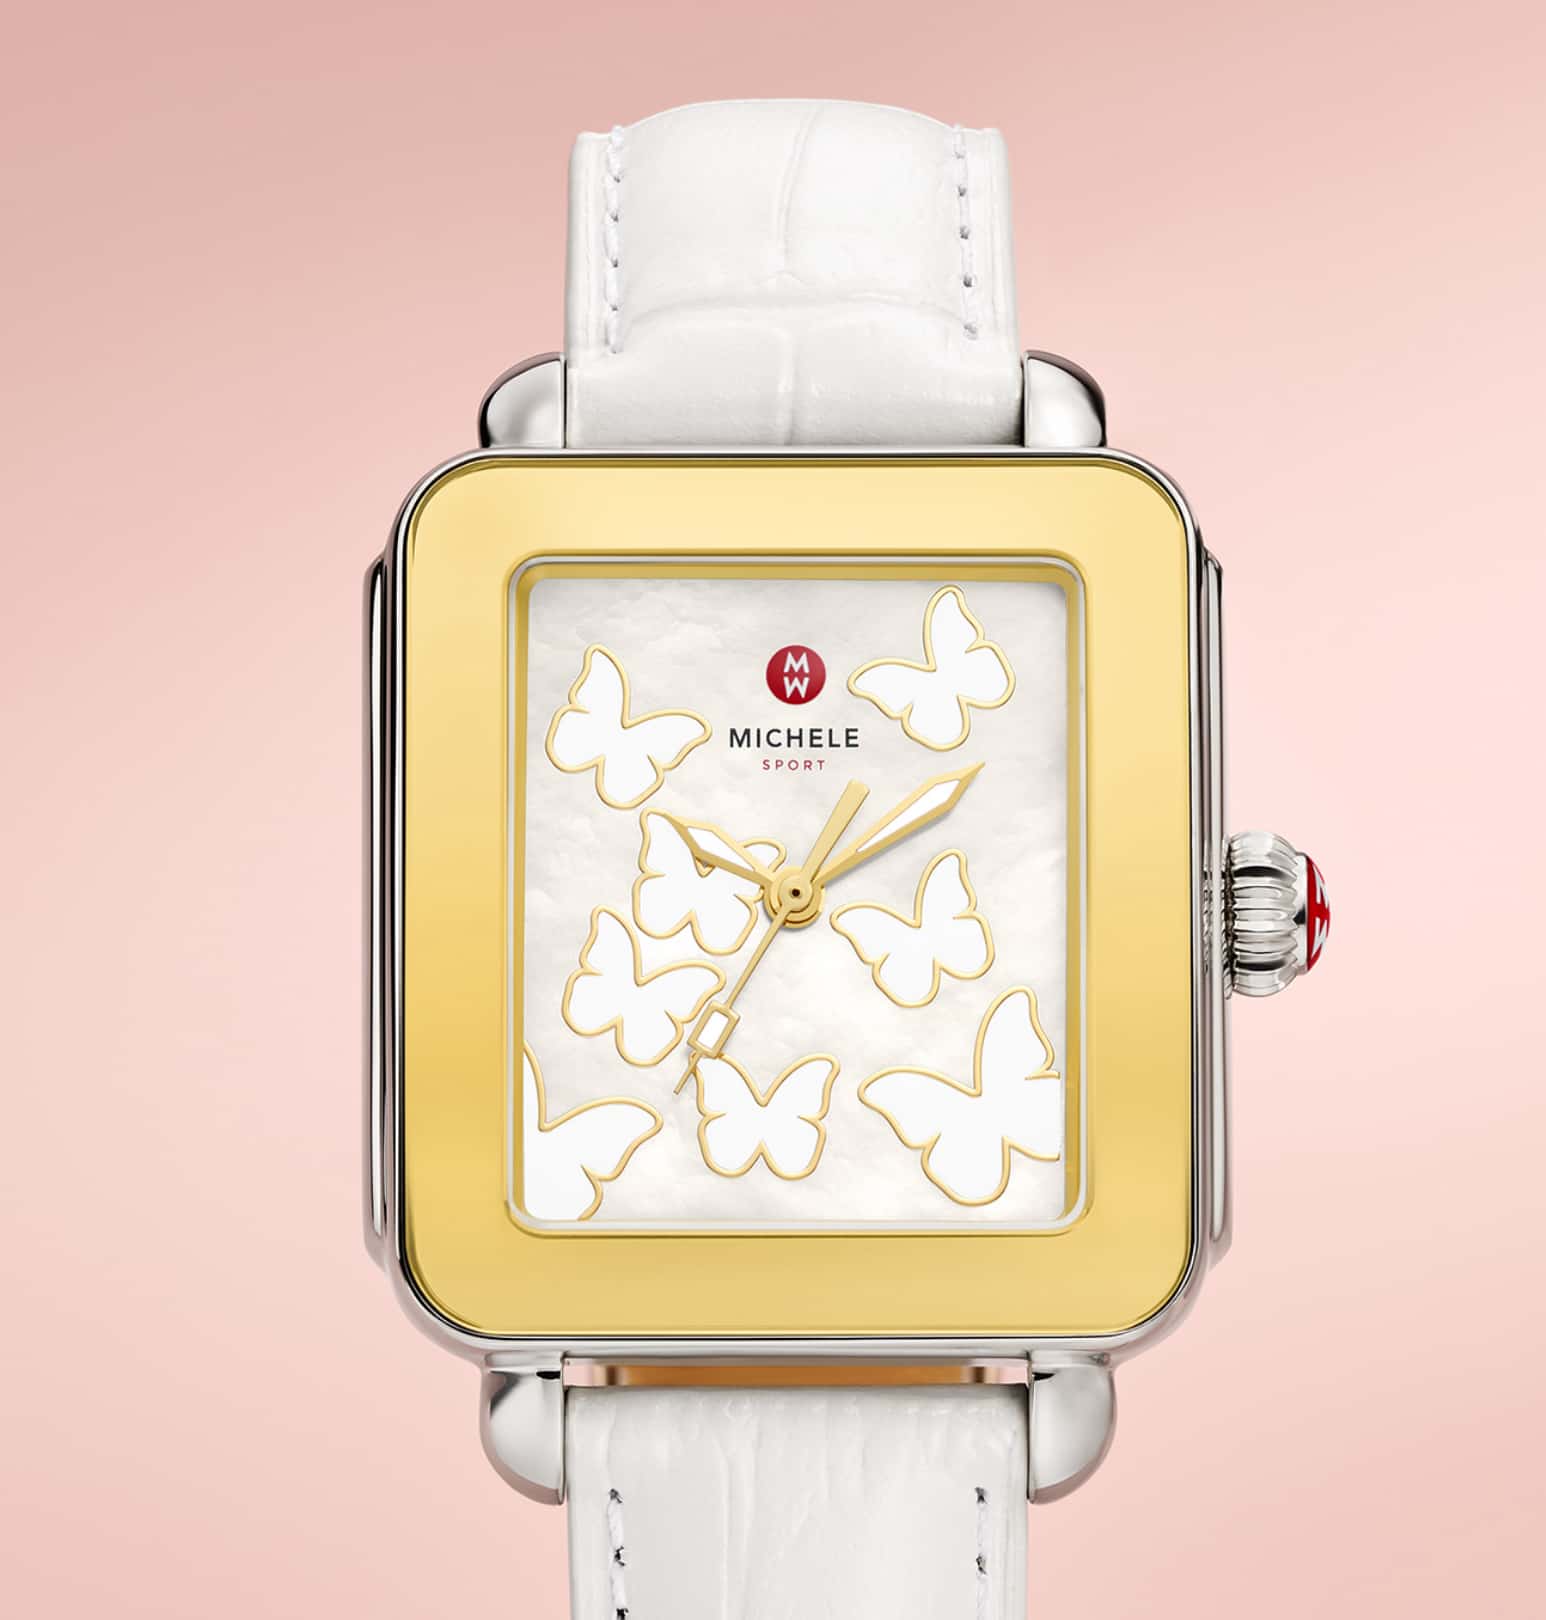 white MICHELE deco sport watch with butterflies on the dial